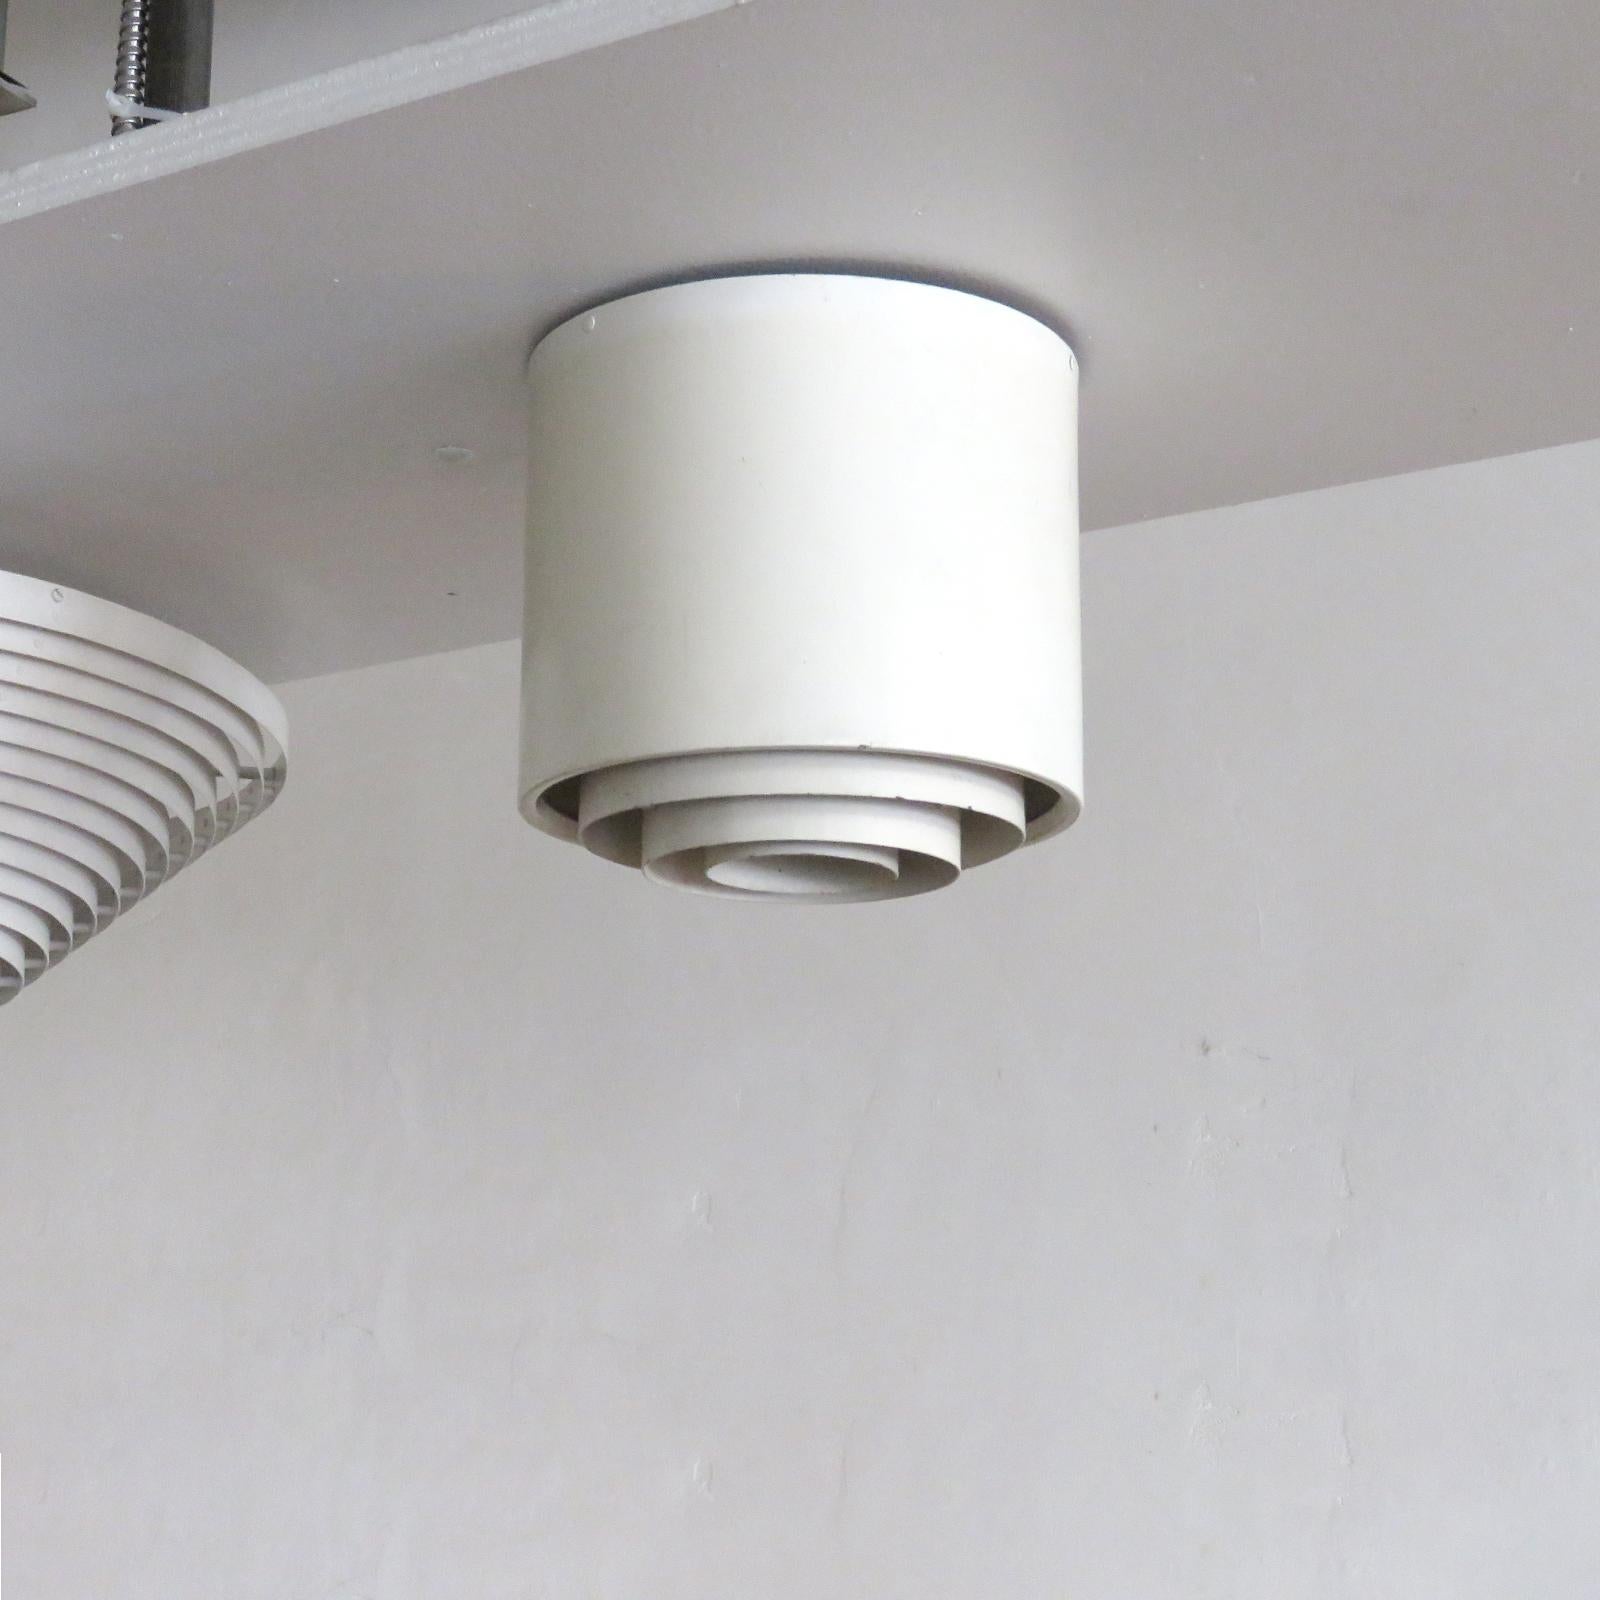 Wonderful flushmount ceiling light by Alvar Aalto for Idman Oy, Finland, in enameled metal with louvered diffuser, one E26 socket, max. wattage 75w each or LED equivalent, wired for US standards or European standards (110v/220v), UL listing